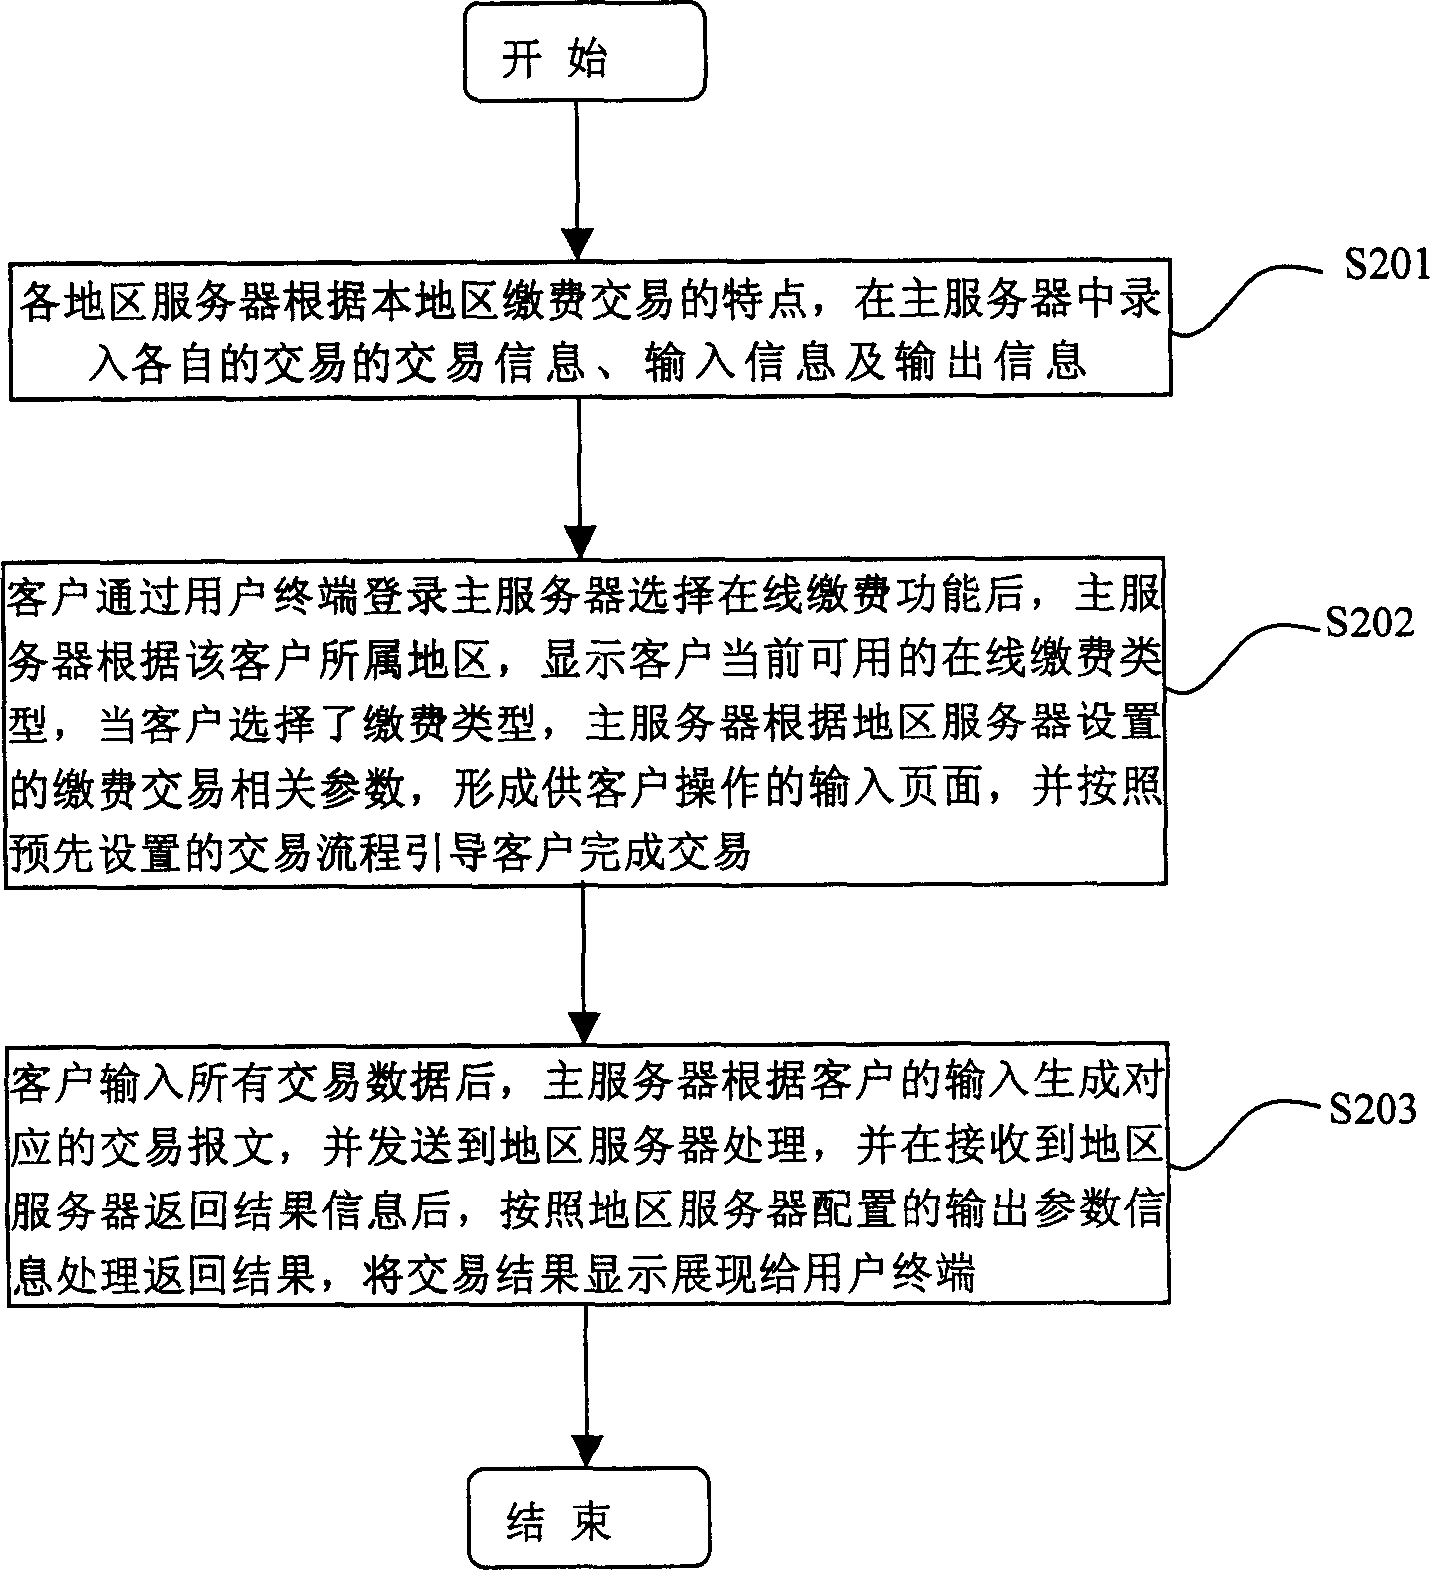 Over network paying system and method, and user interface providing system and method